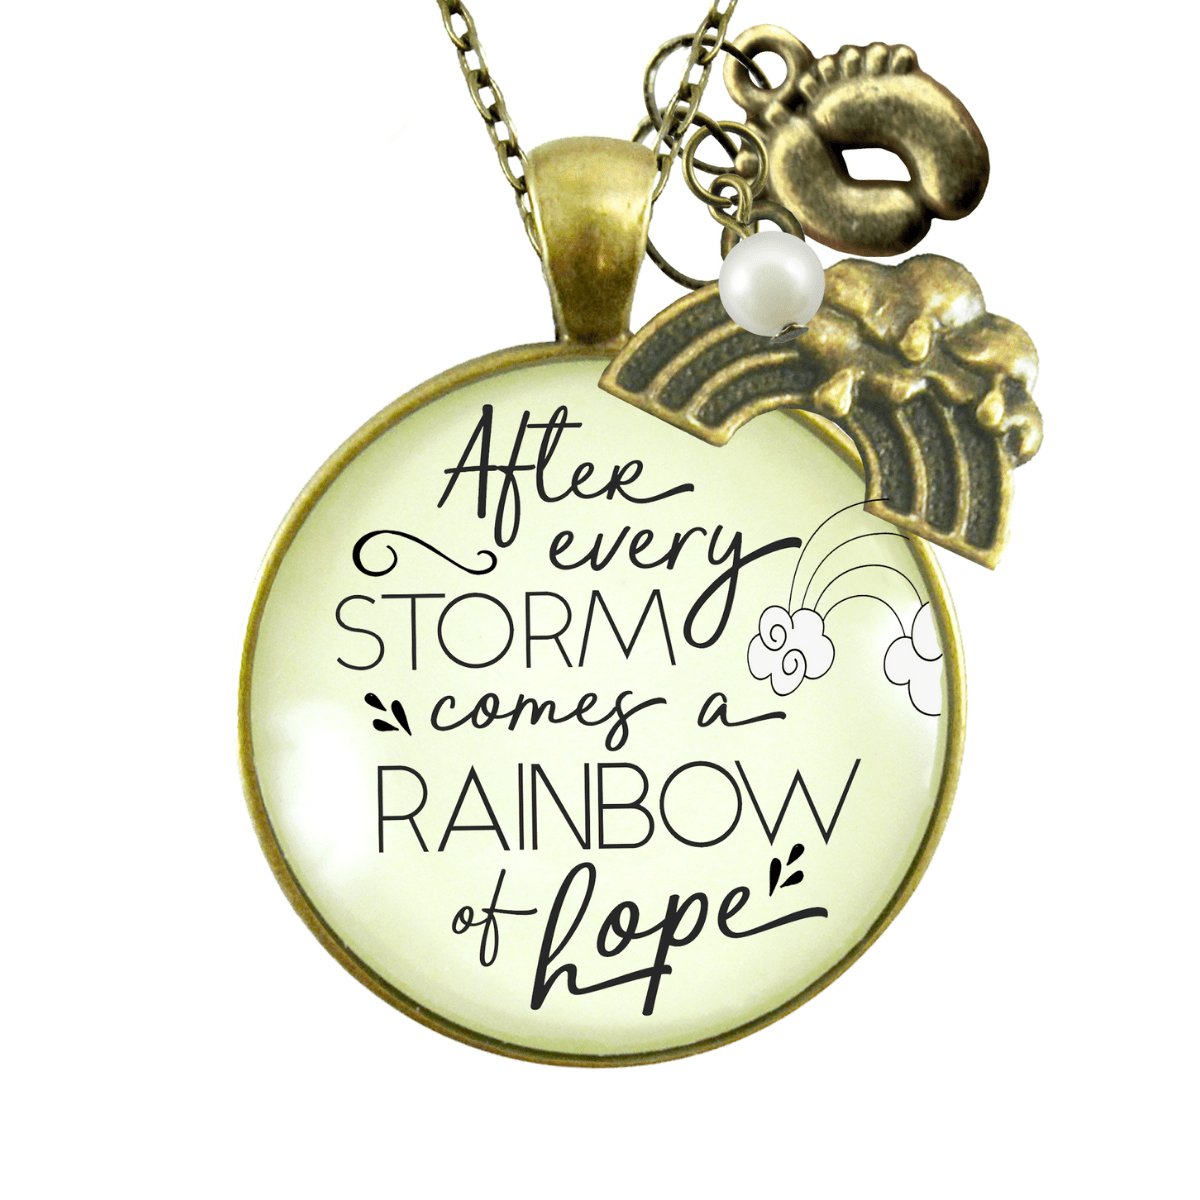 Gutsy Goodness Rainbow Baby Jewelry After Storm Comes Hope Mom Necklace Gift - Gutsy Goodness Handmade Jewelry;Rainbow Baby Jewelry After Storm Comes Hope Mom Necklace Gift - Gutsy Goodness Handmade Jewelry Gifts